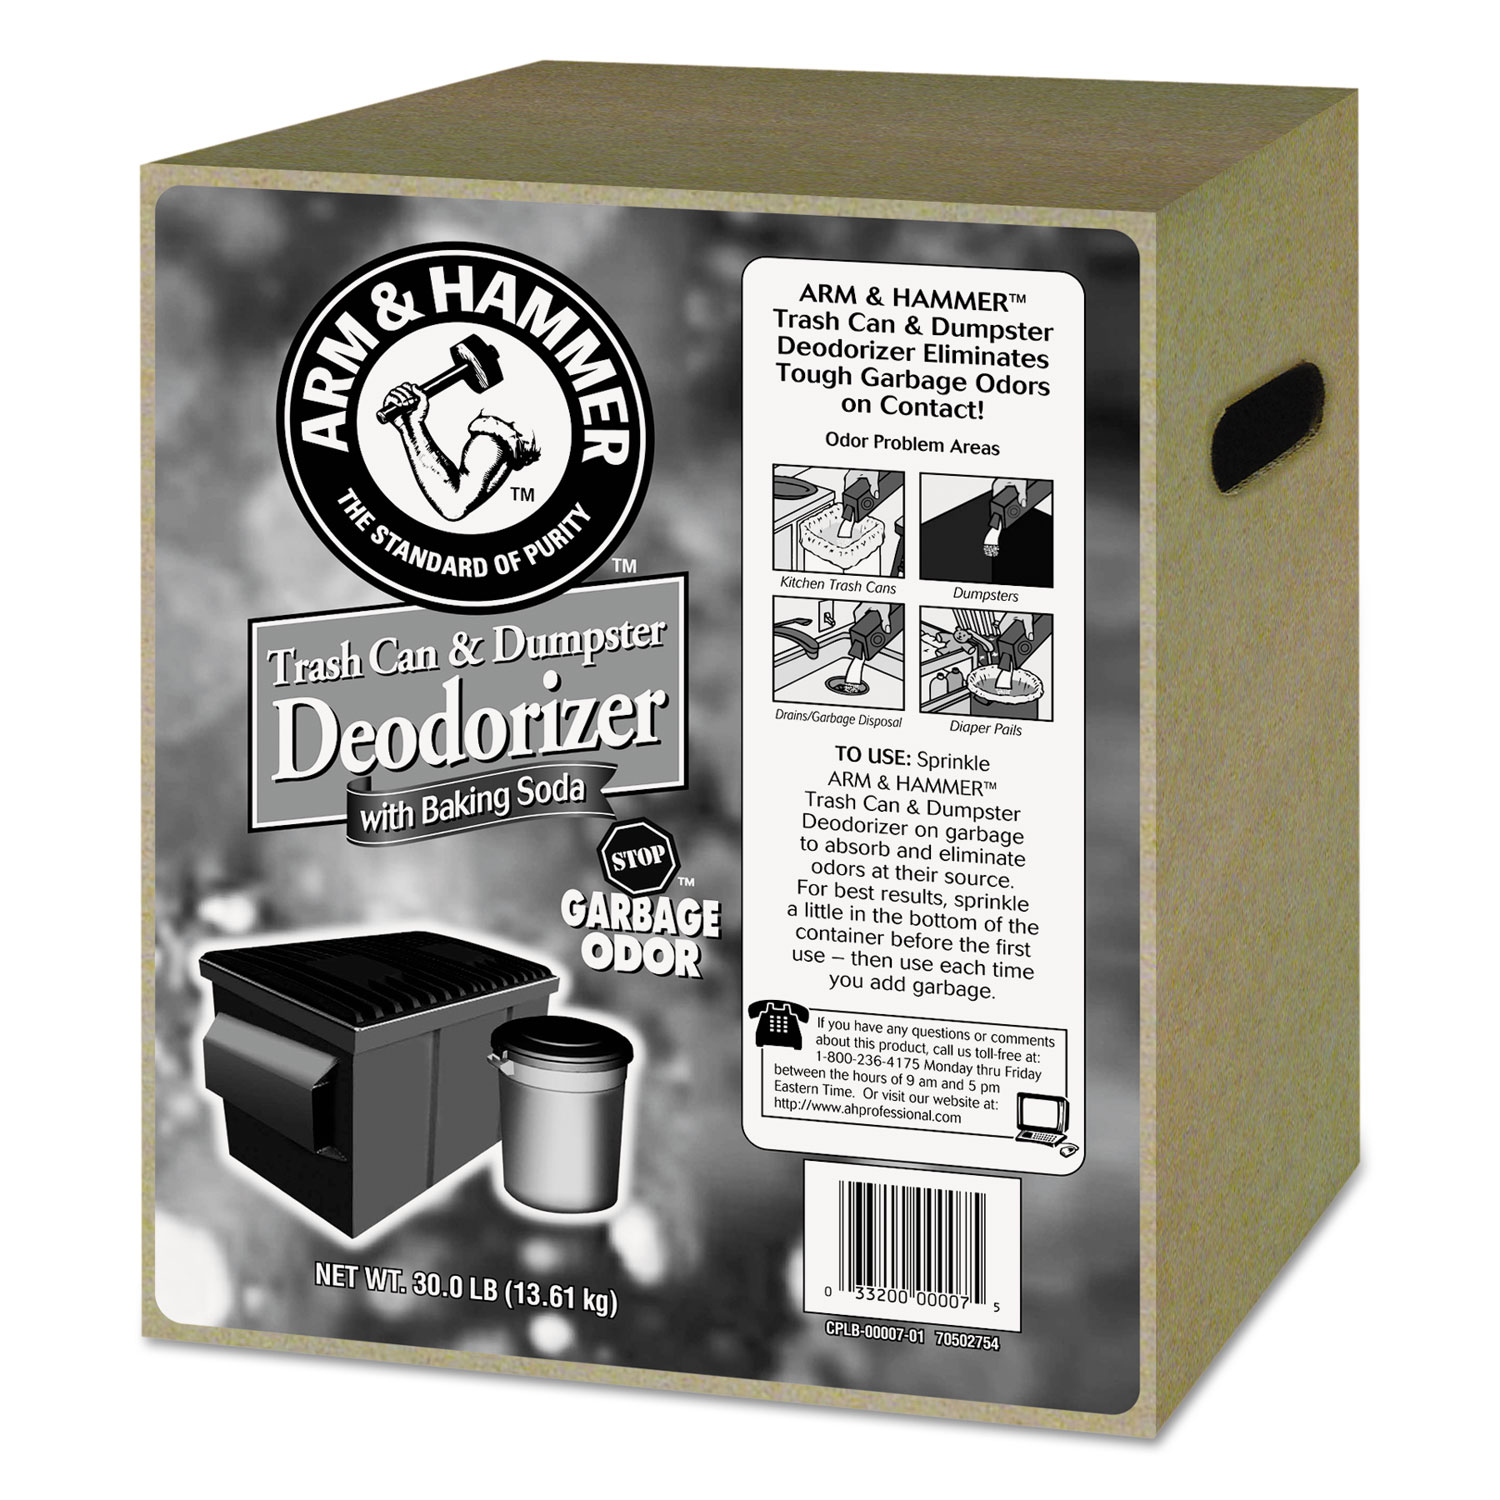  Arm & Hammer 33200-00007 Trash Can & Dumpster Deodorizer with Baking Soda, Unscented, Powder, 30 lb (CDC3320000007) 